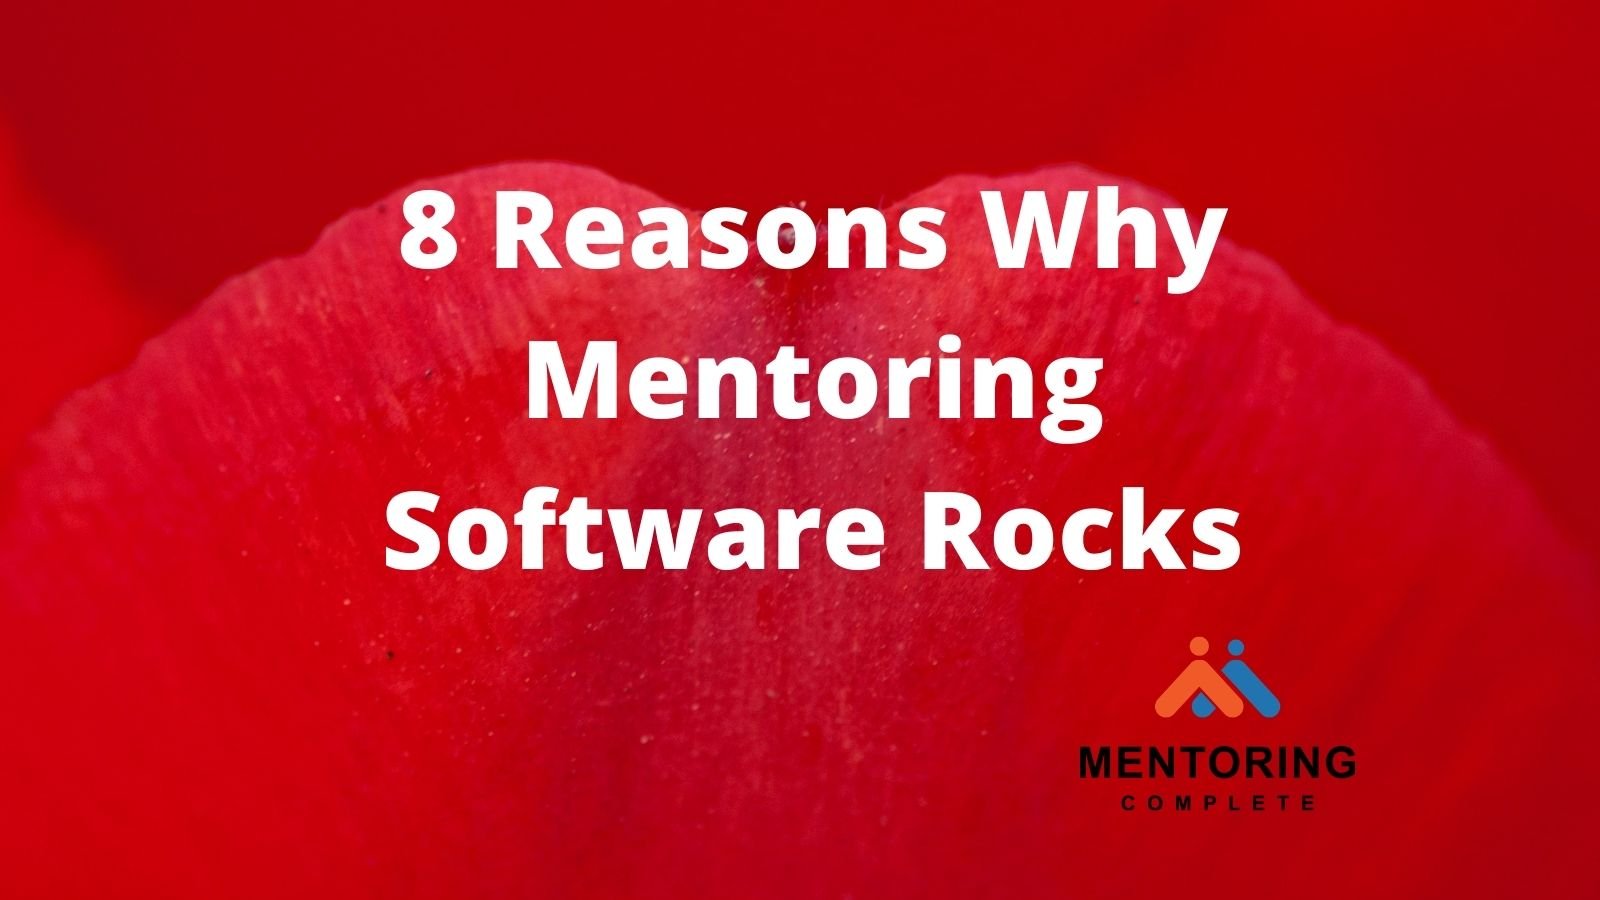 Why mentoring software rocks